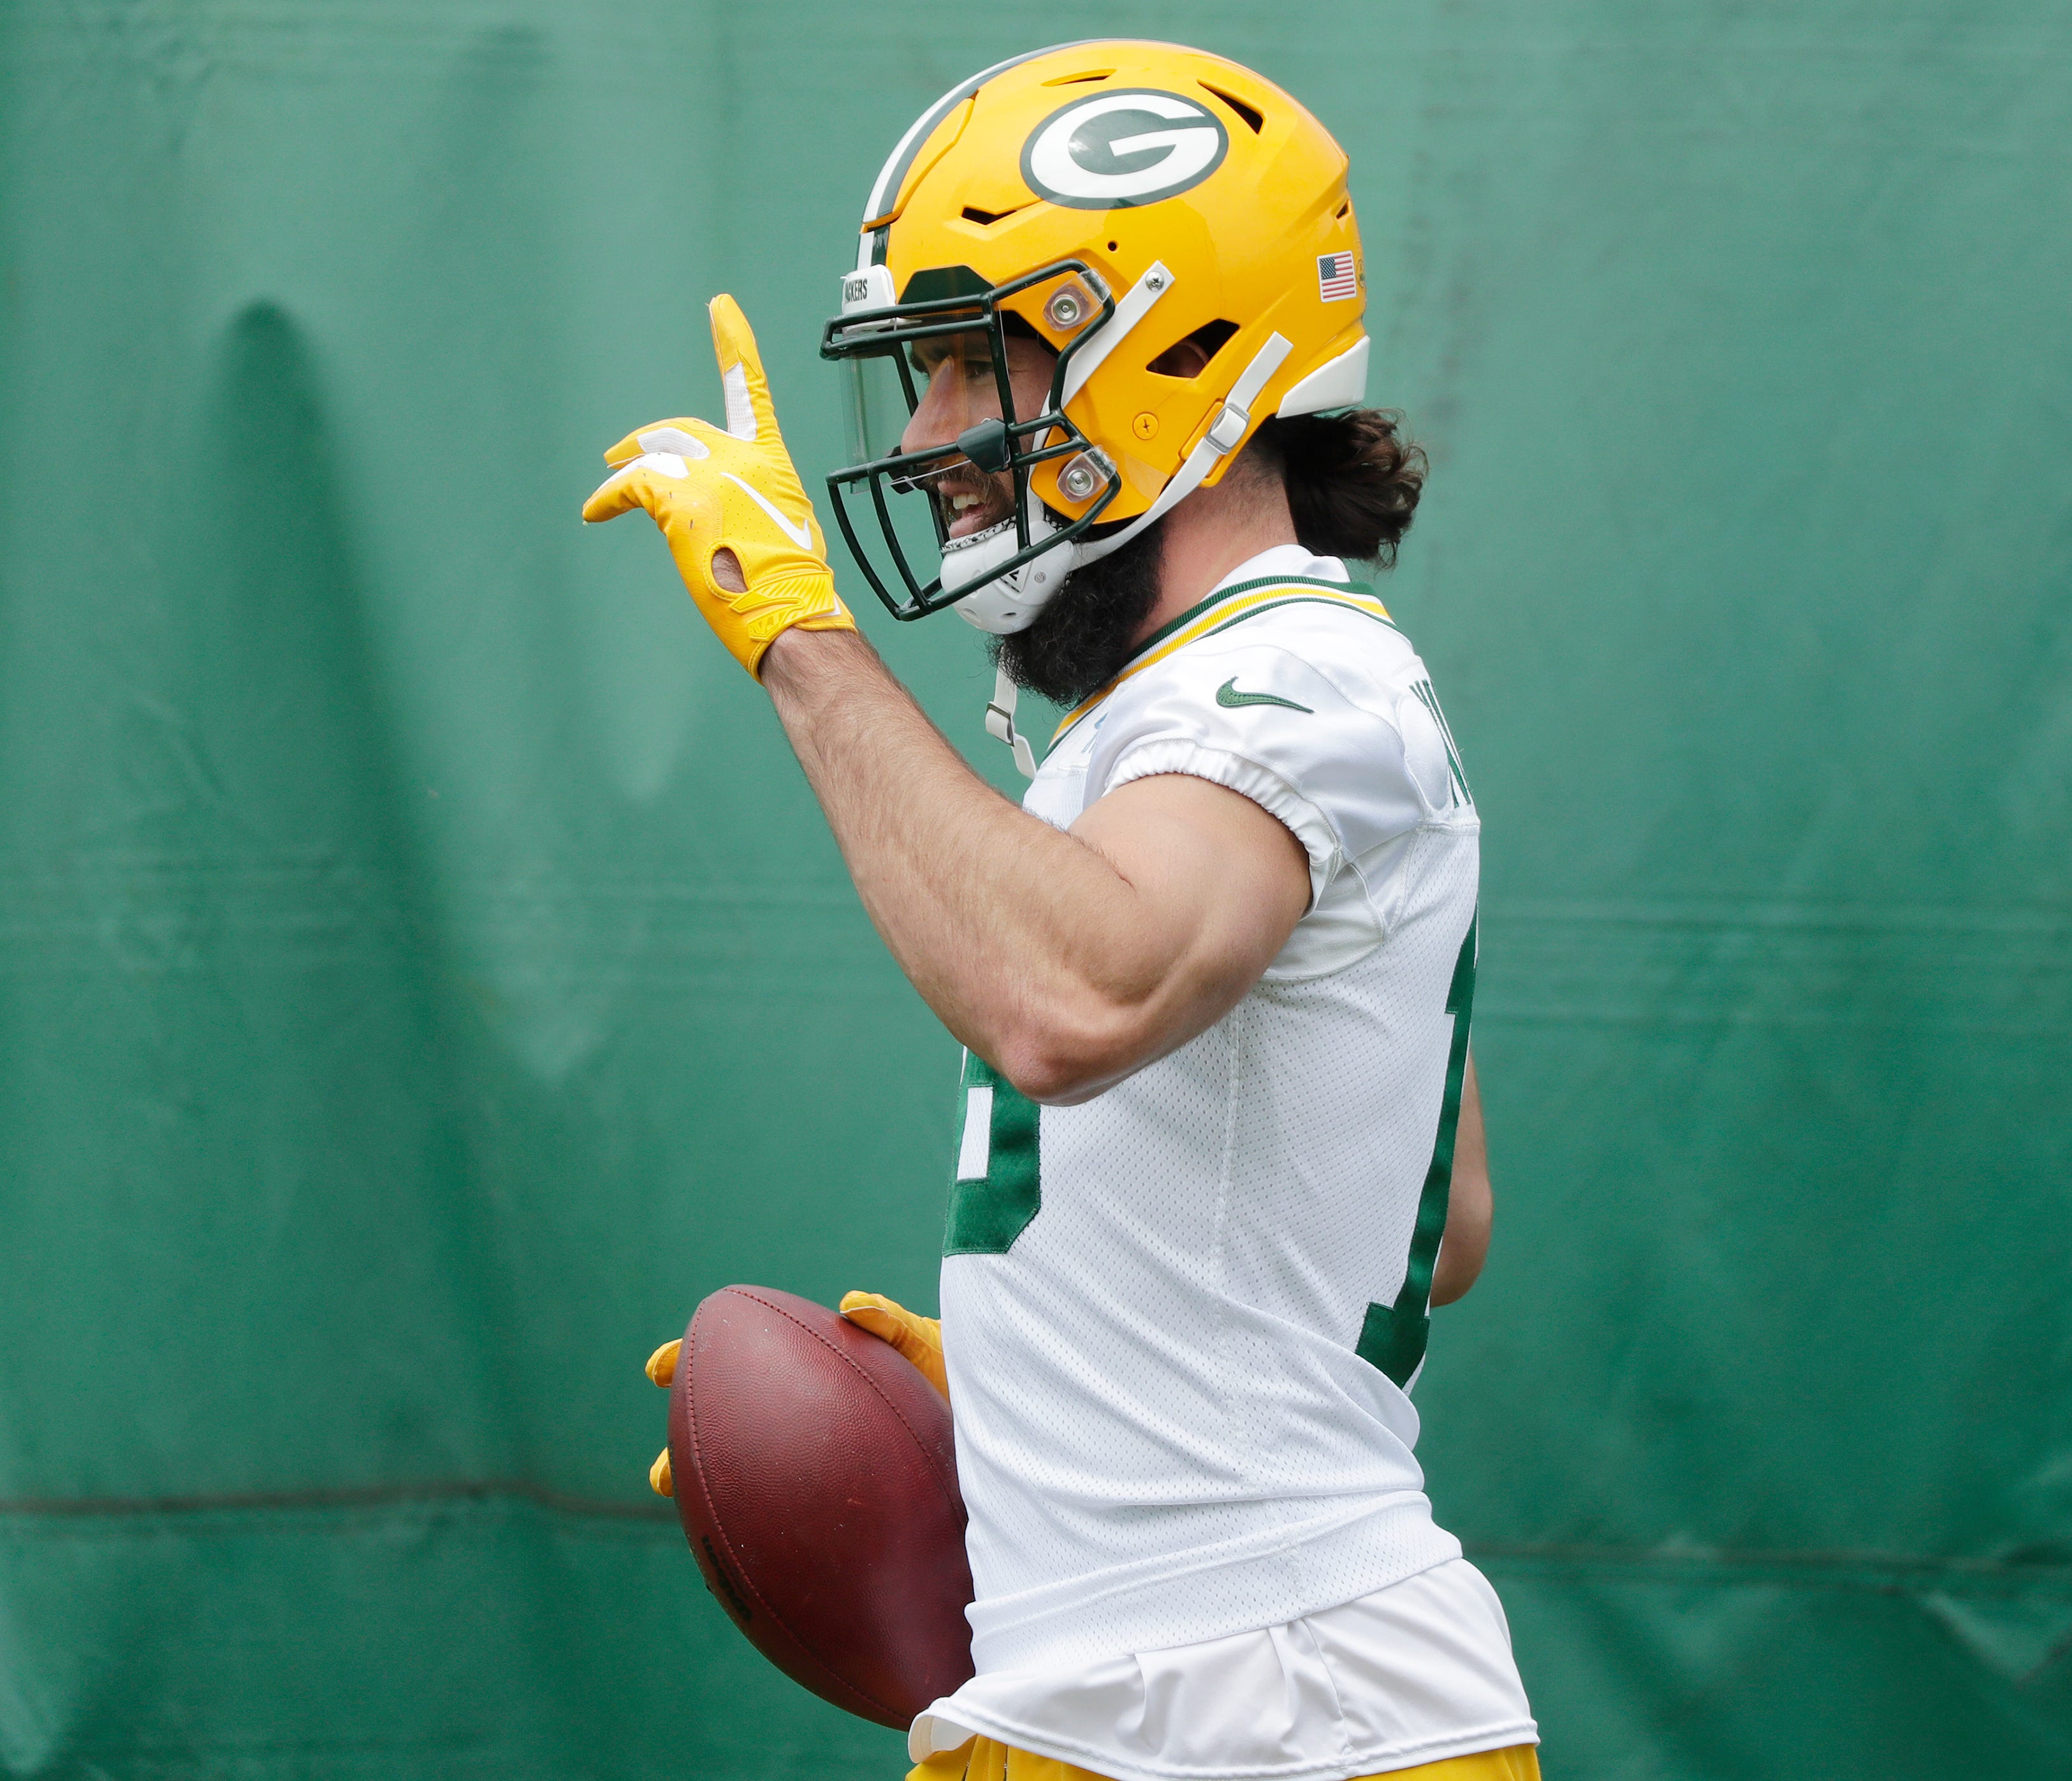 Green Bay Packers wide receiver Jake Kumerow (16) during practice at Clarke Hinkle Field on Tuesday, May 21, 2019 in Ashwaubenon, Wis.
Adam Wesley/USA TODAY NETWORK-Wis